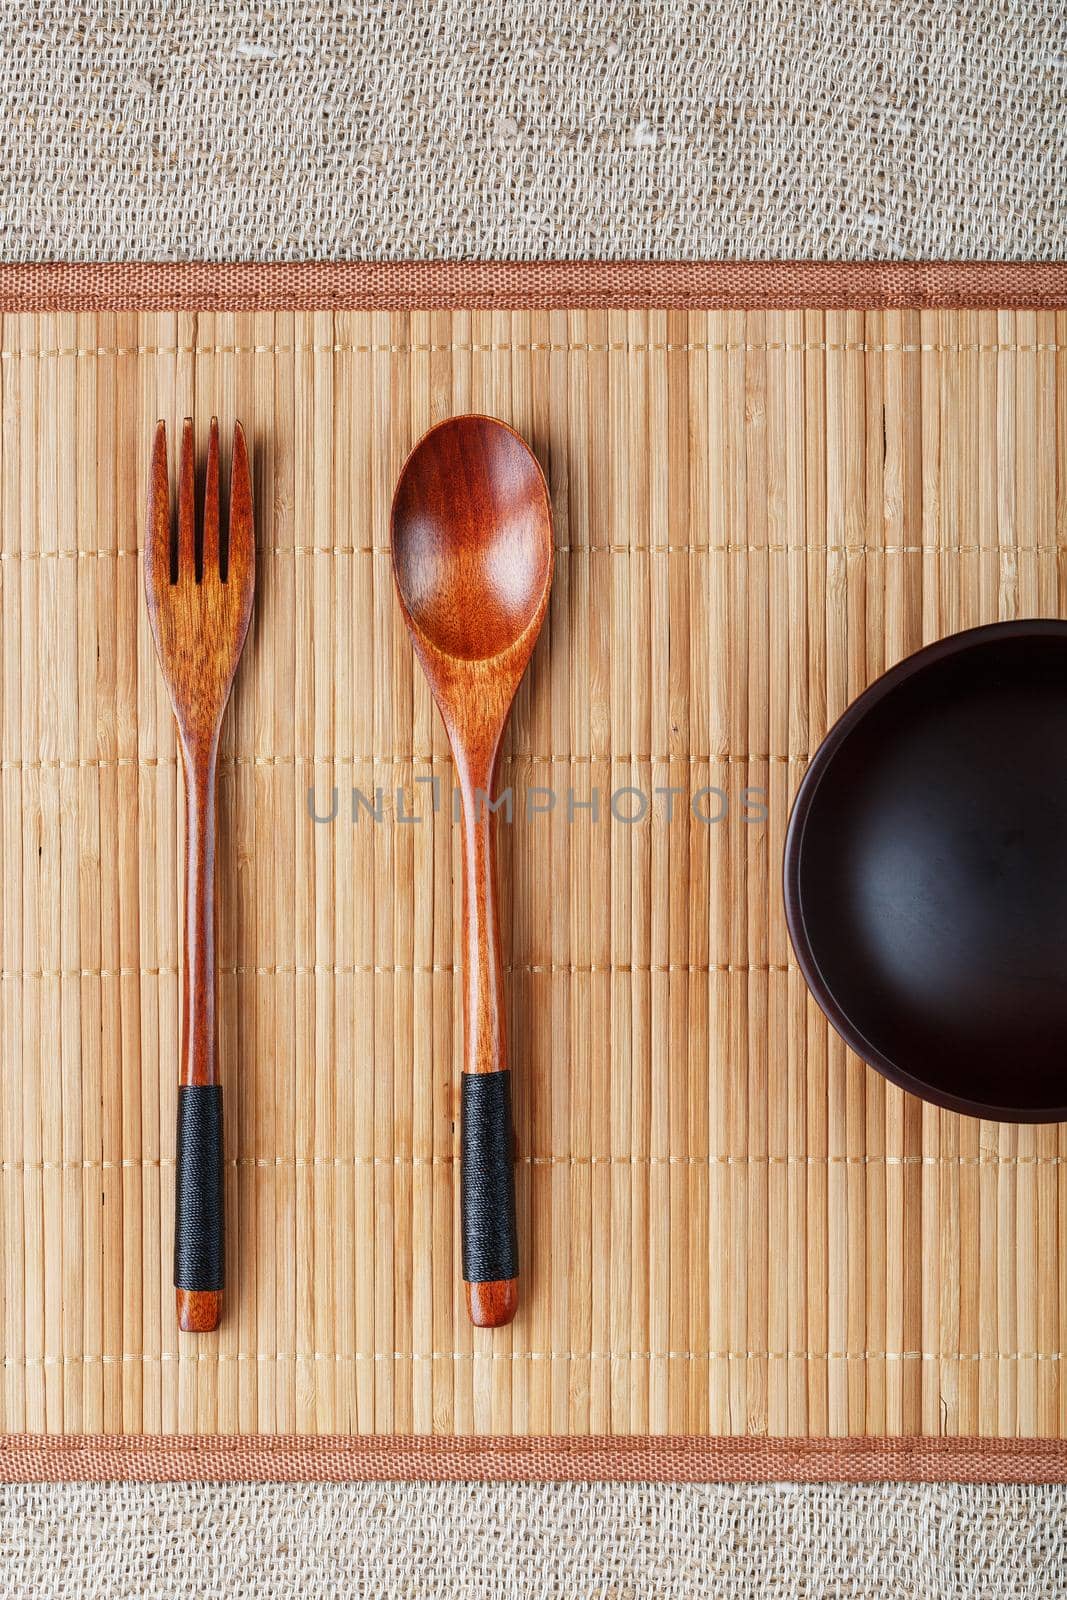 Natural wood plate, spoon and fork on a bamboo backing. by AlexGrec